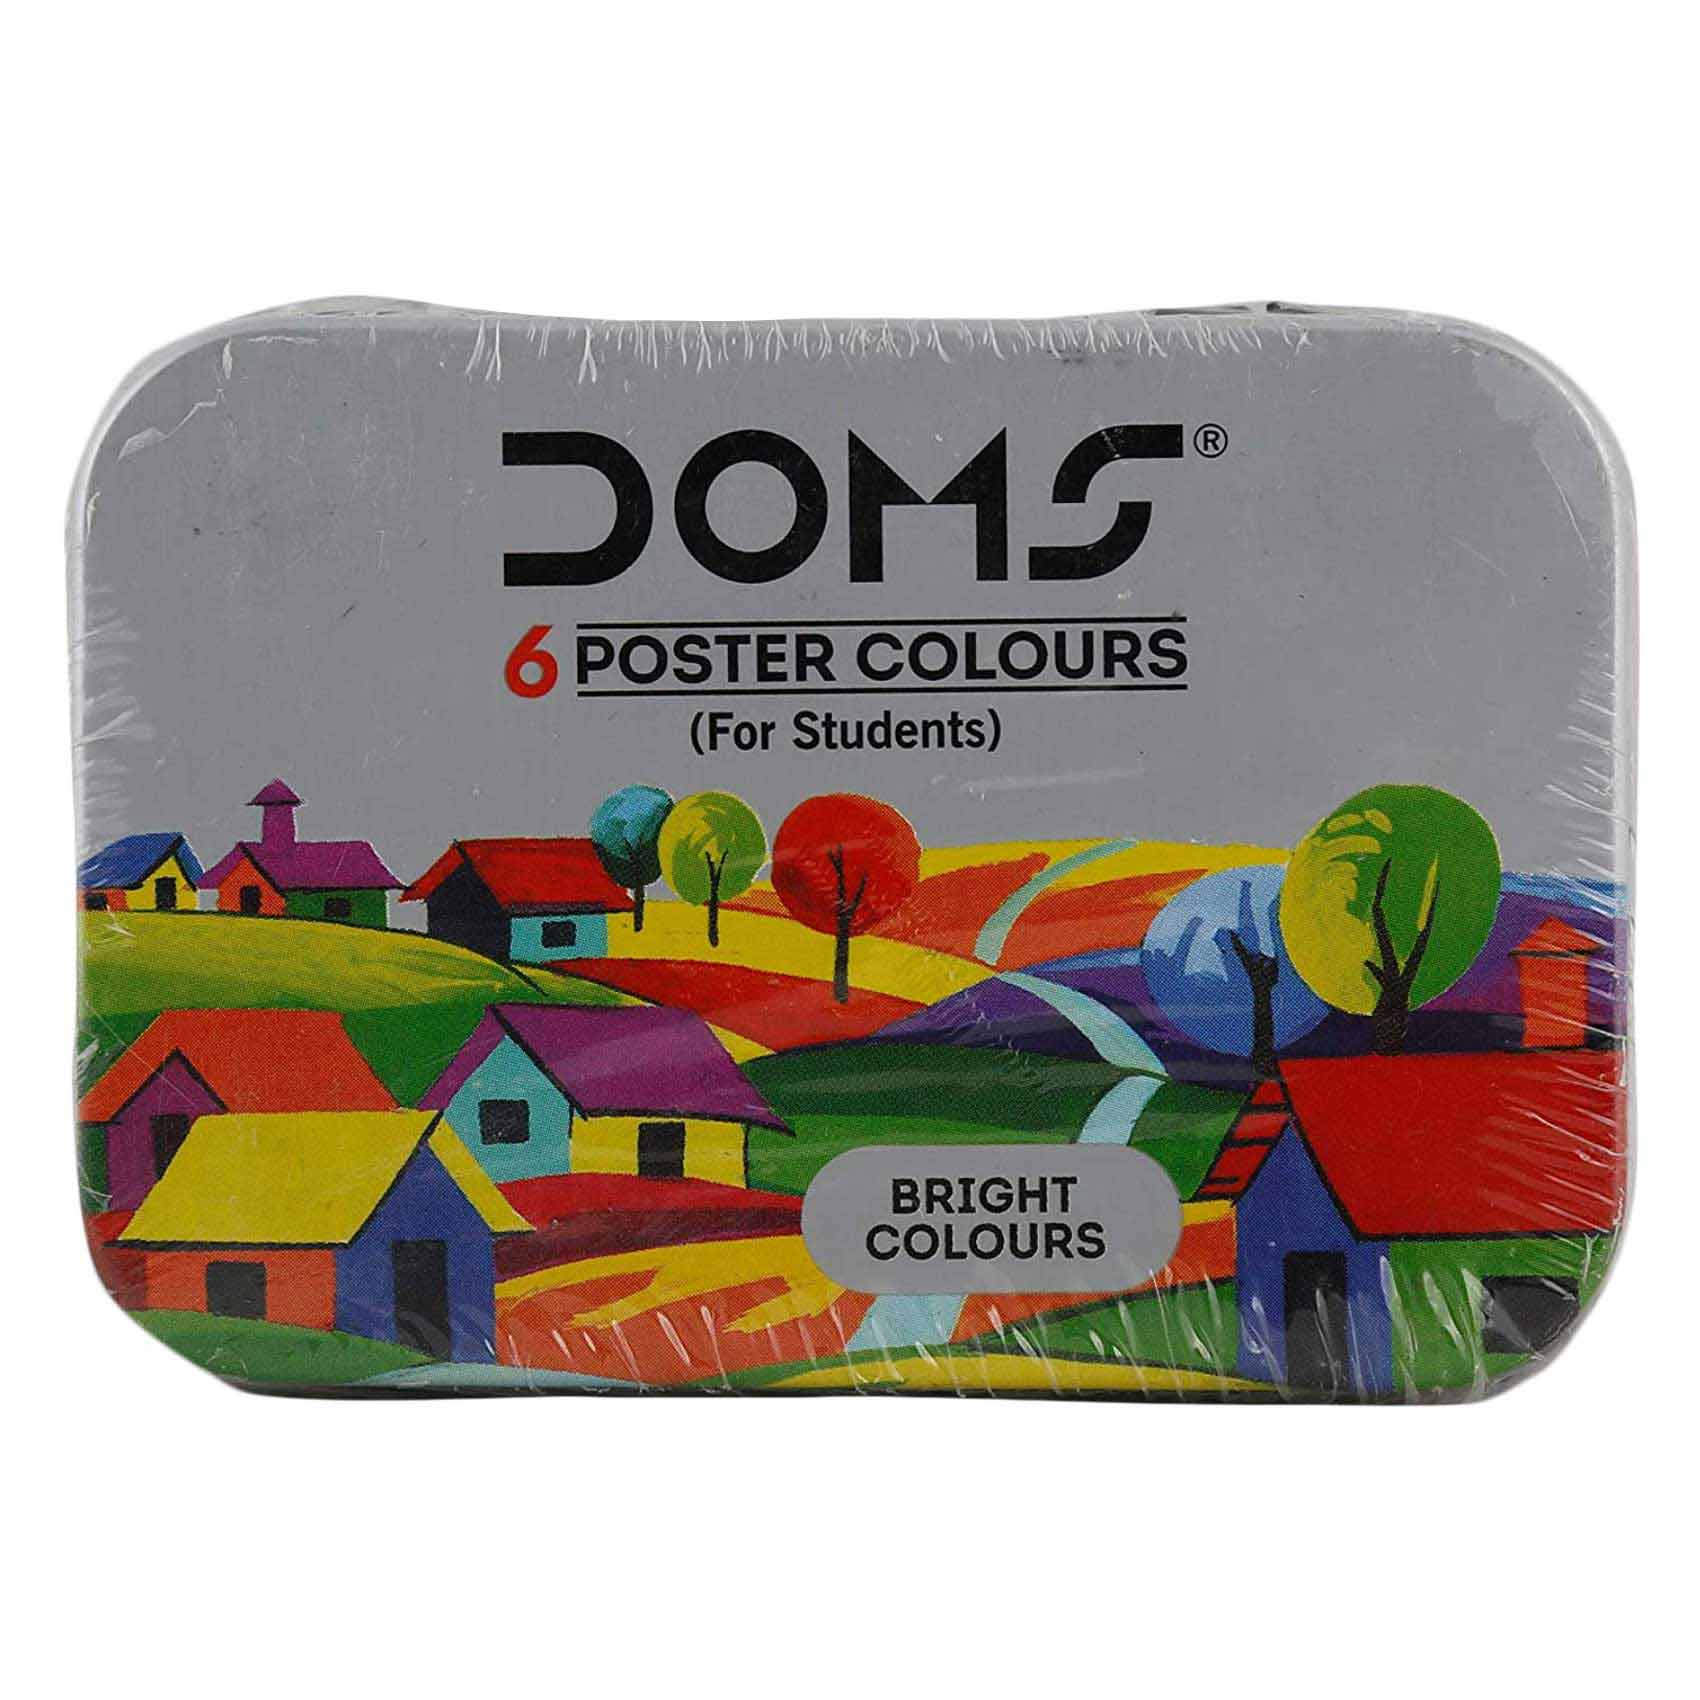 DOMS POSTER COLOURS 6 SHADES